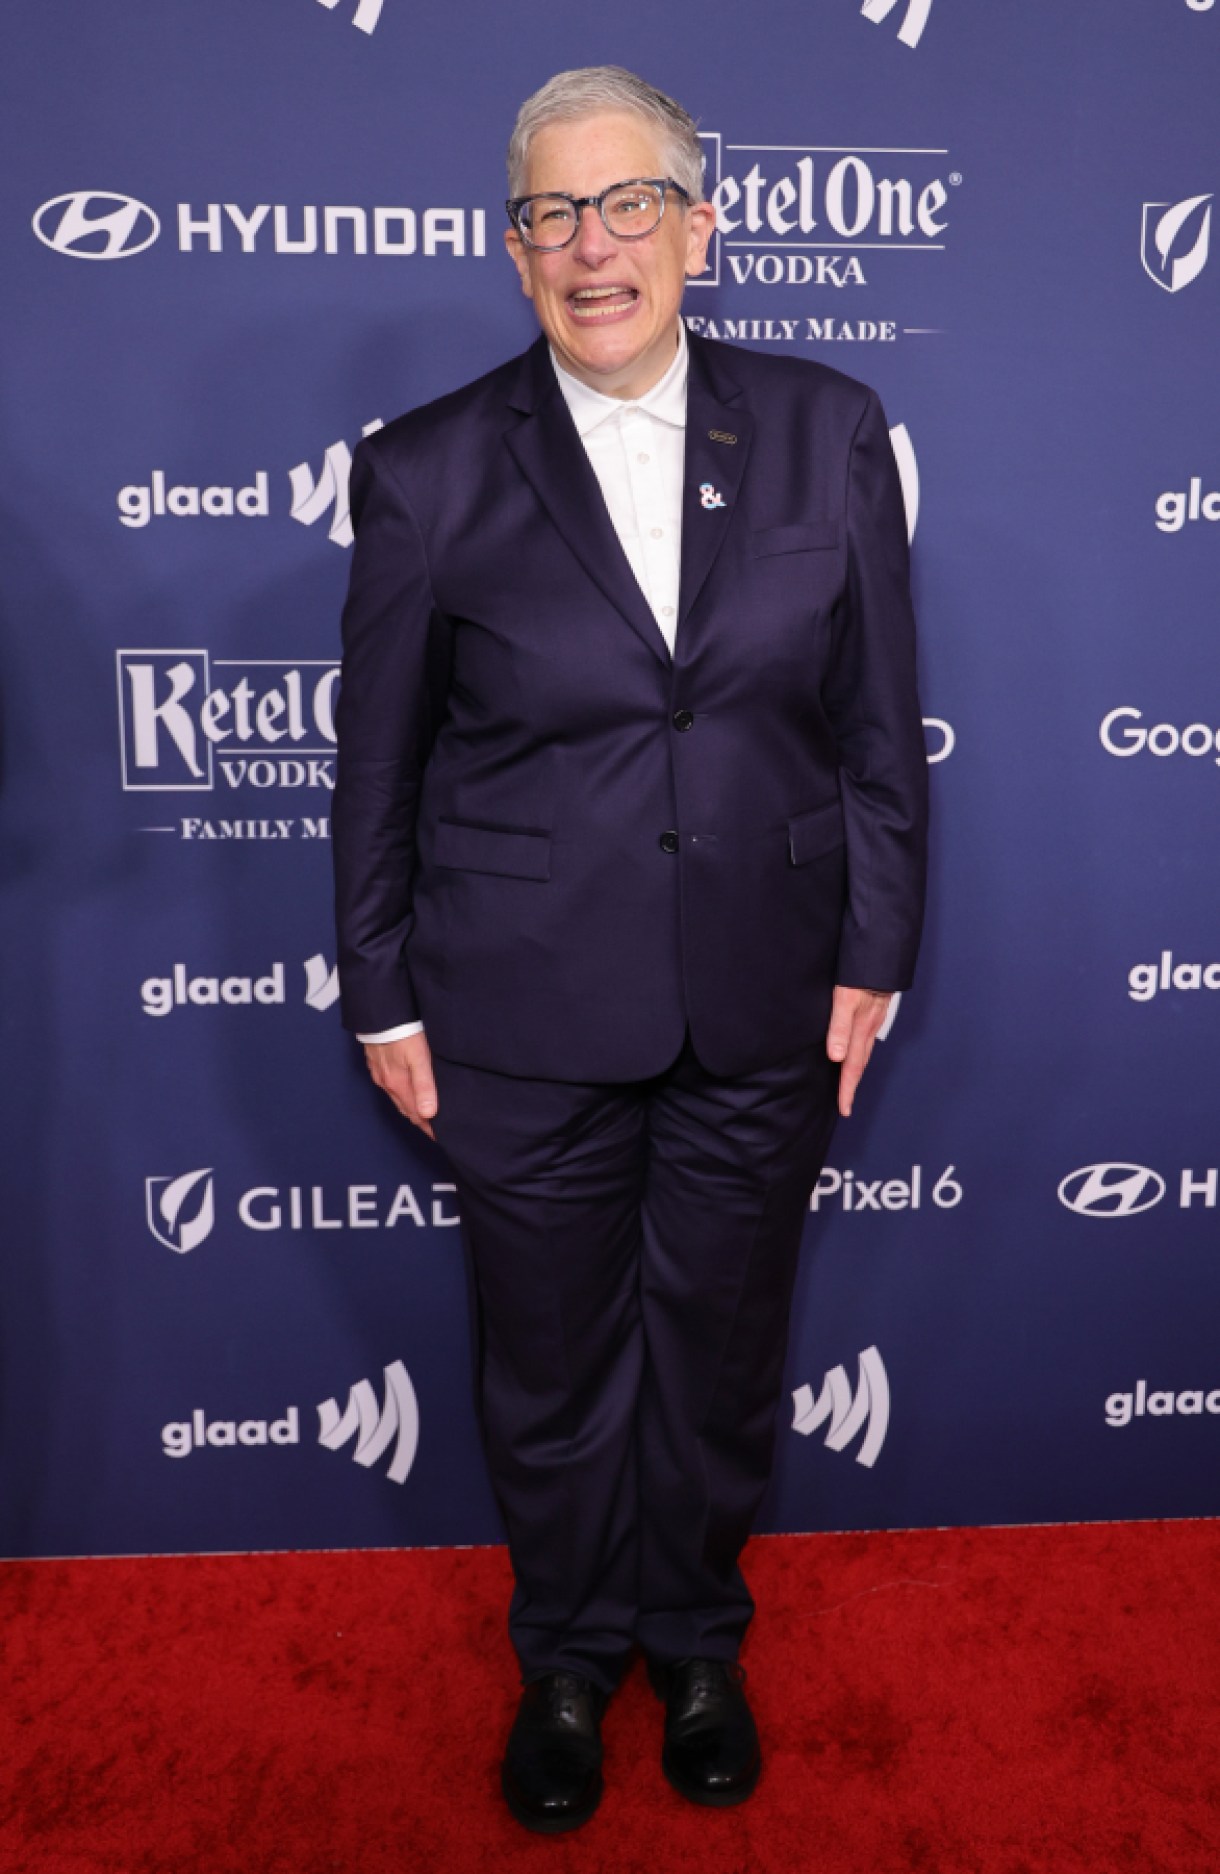 BEVERLY HILLS, CALIFORNIA - APRIL 02: Abby McEnany attends the 33rd Annual GLAAD Media Awards on April 02, 2022 in Beverly Hills, California. (Photo by Momodu Mansaray/WireImage,)